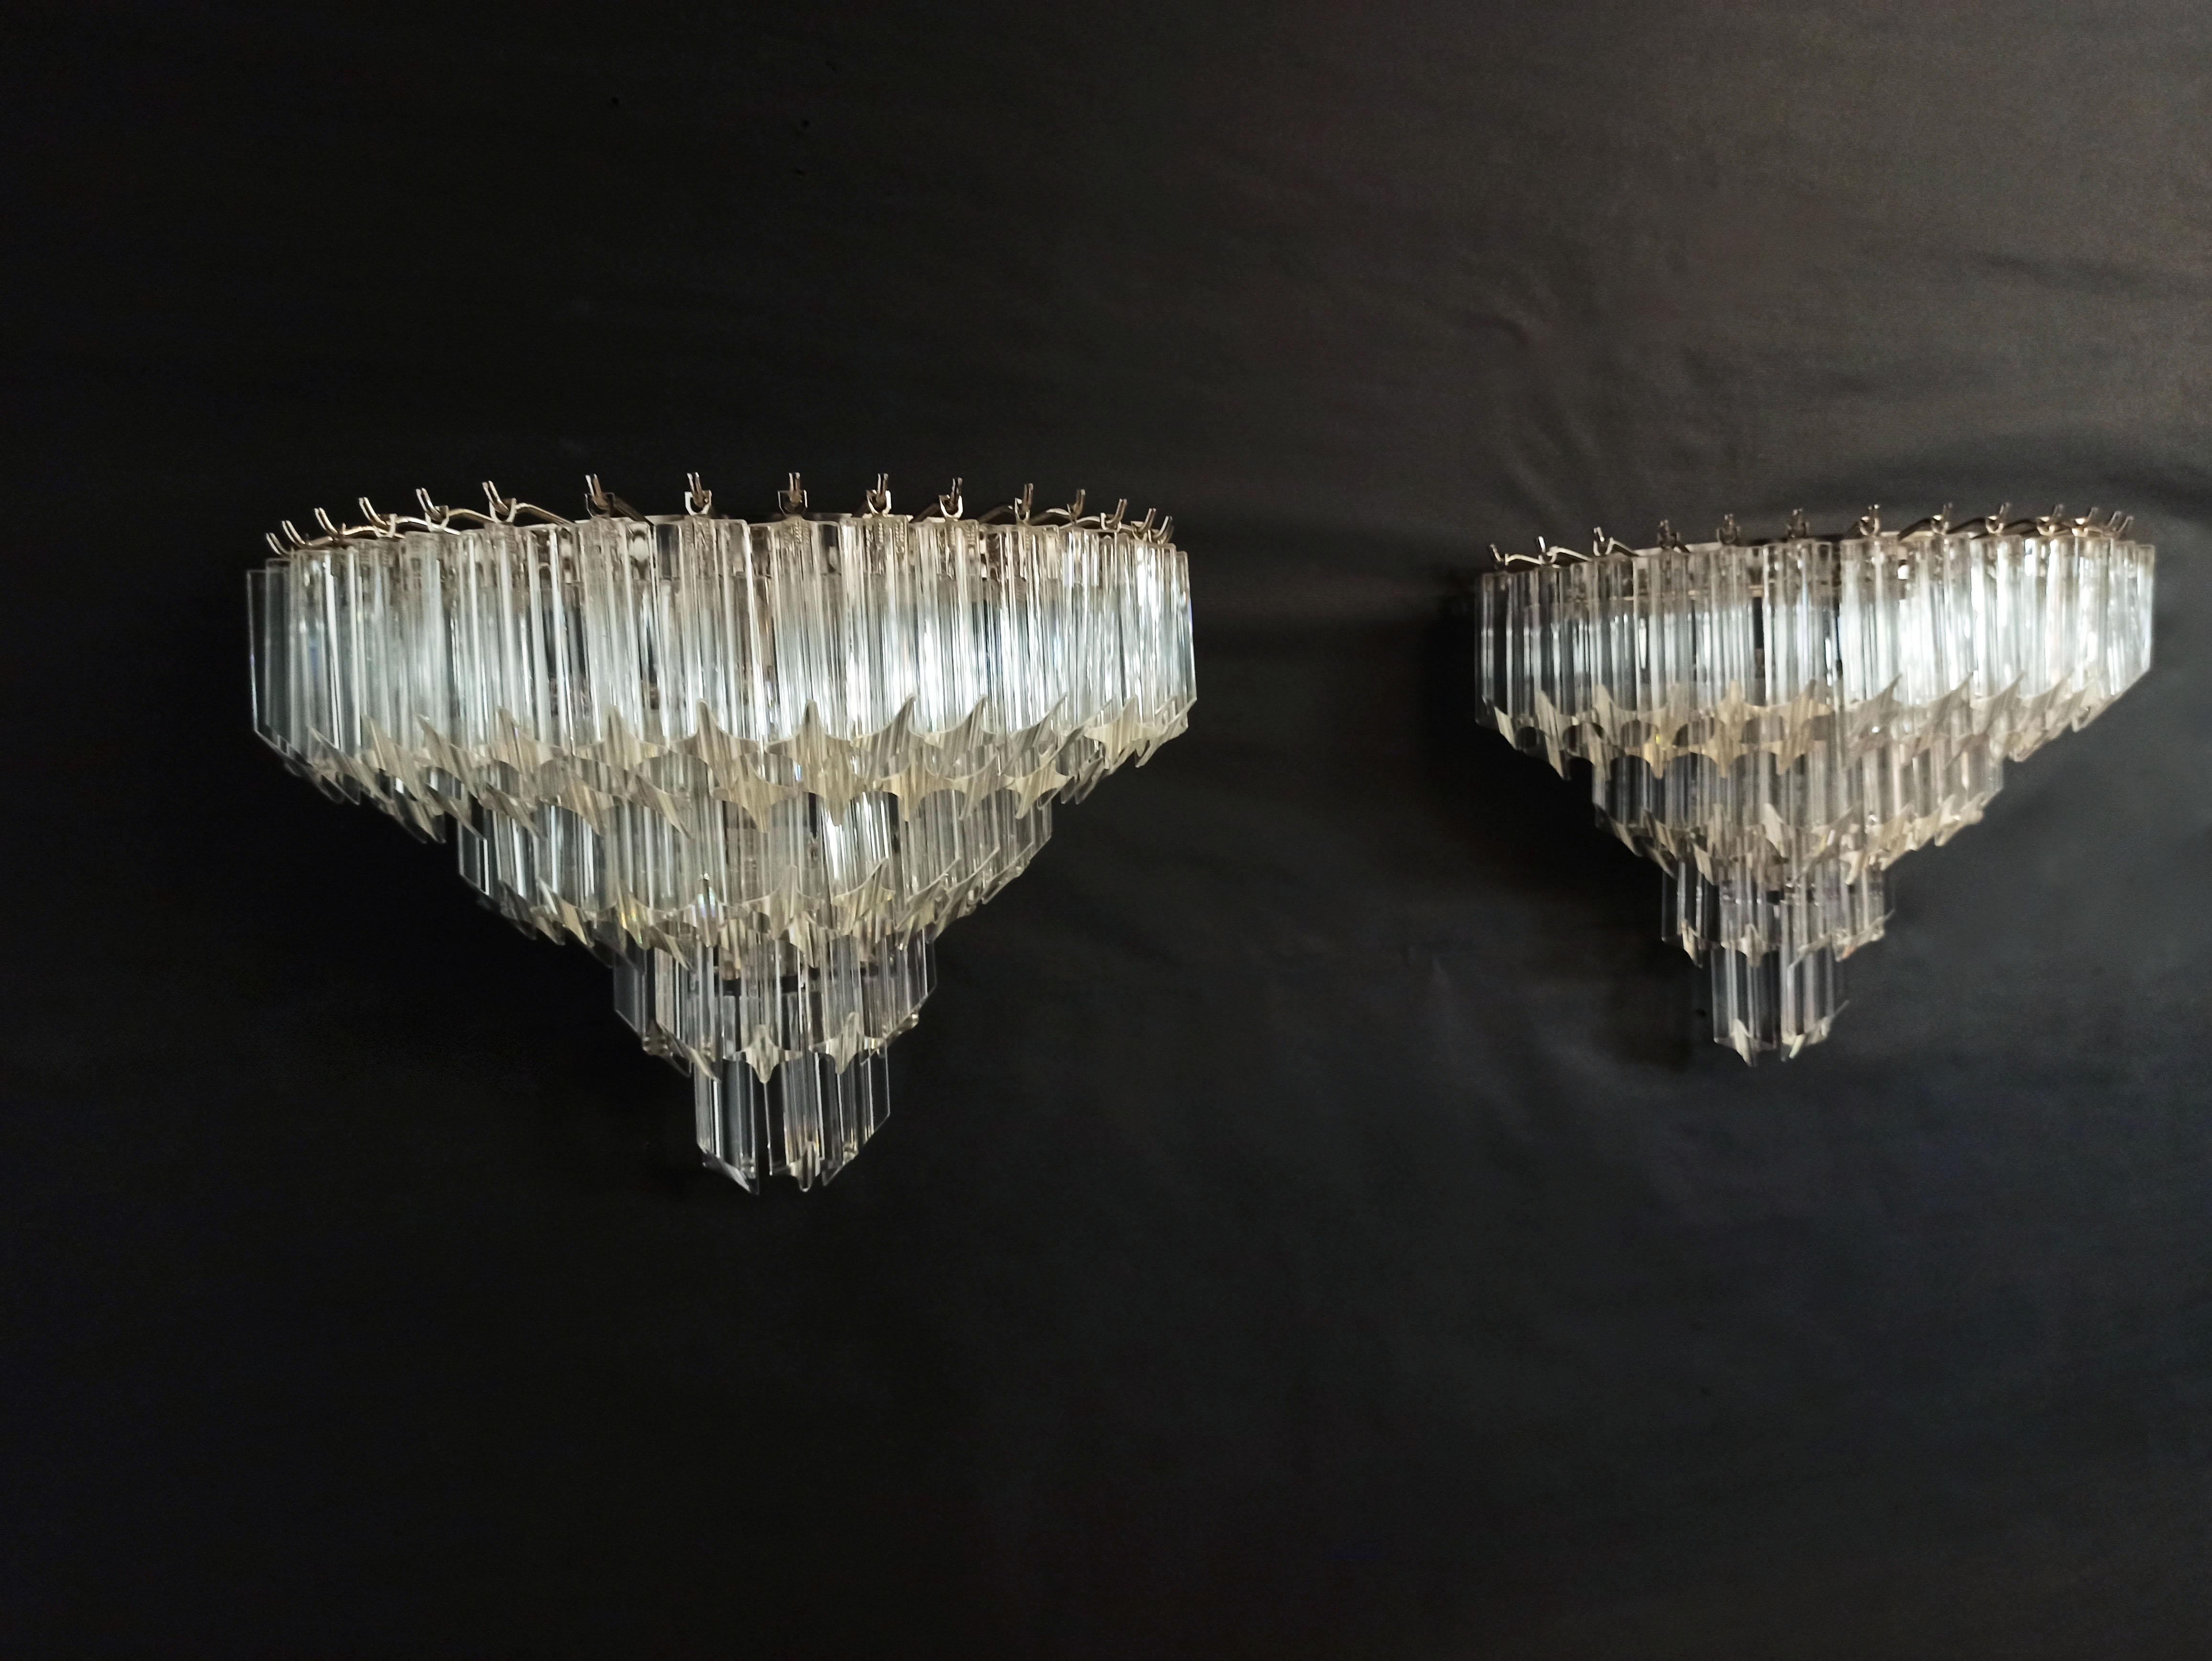 Fantastic pair of vintage Murano wall sconce made by 63 Murano crystal prism (quadriedri) for each applique in a chrome metal frame.
Period: 1980s
Dimensions: 13,60 inches height (35 cm); 16,60 inches width (43 cm); 8,15 inches depth from the wall